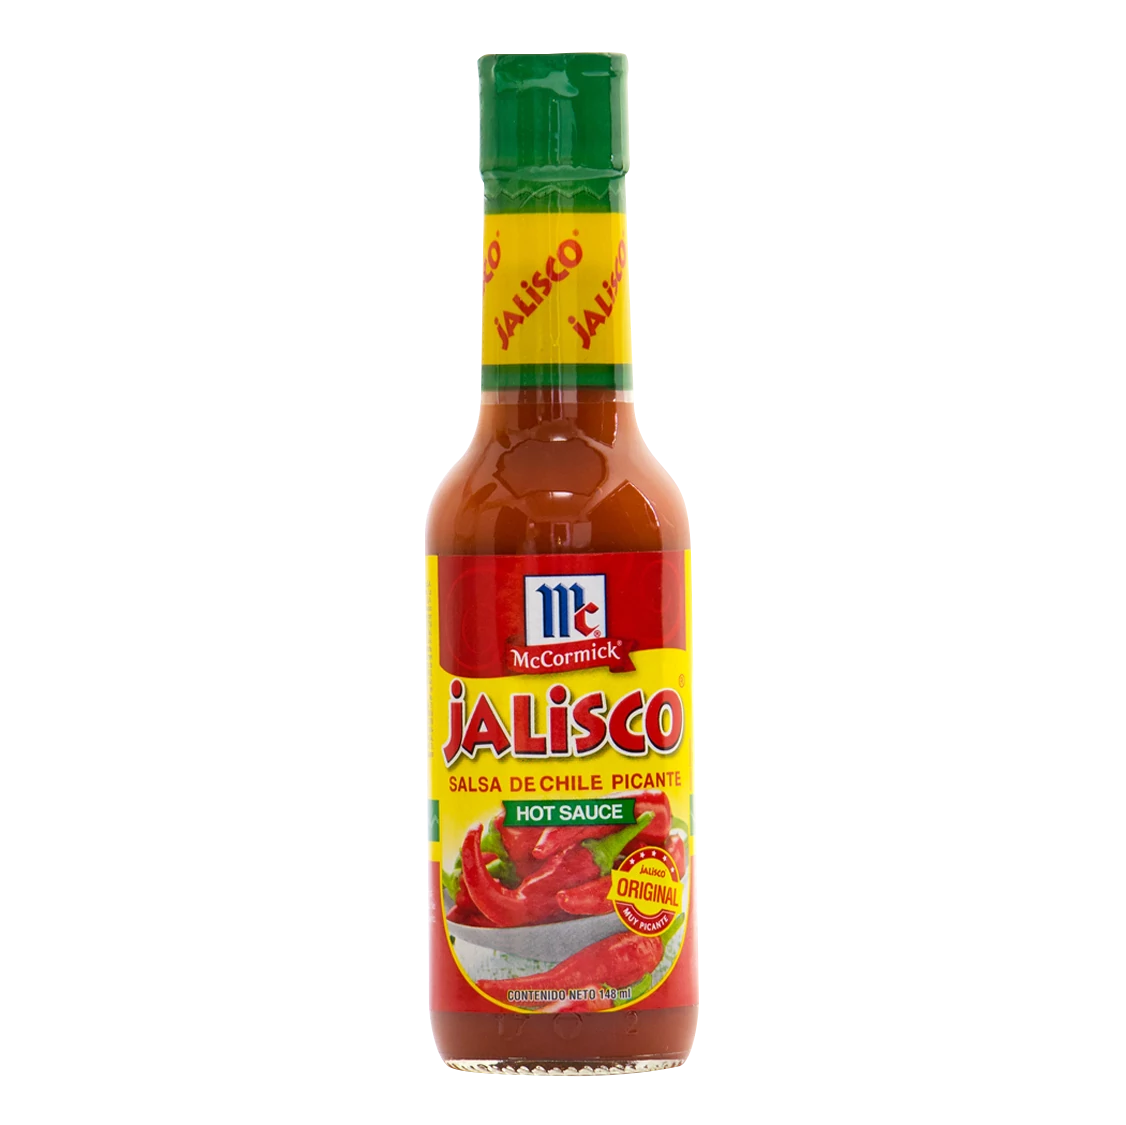 salsa_chile_picante_jalisco_mccormick_148_ml.png